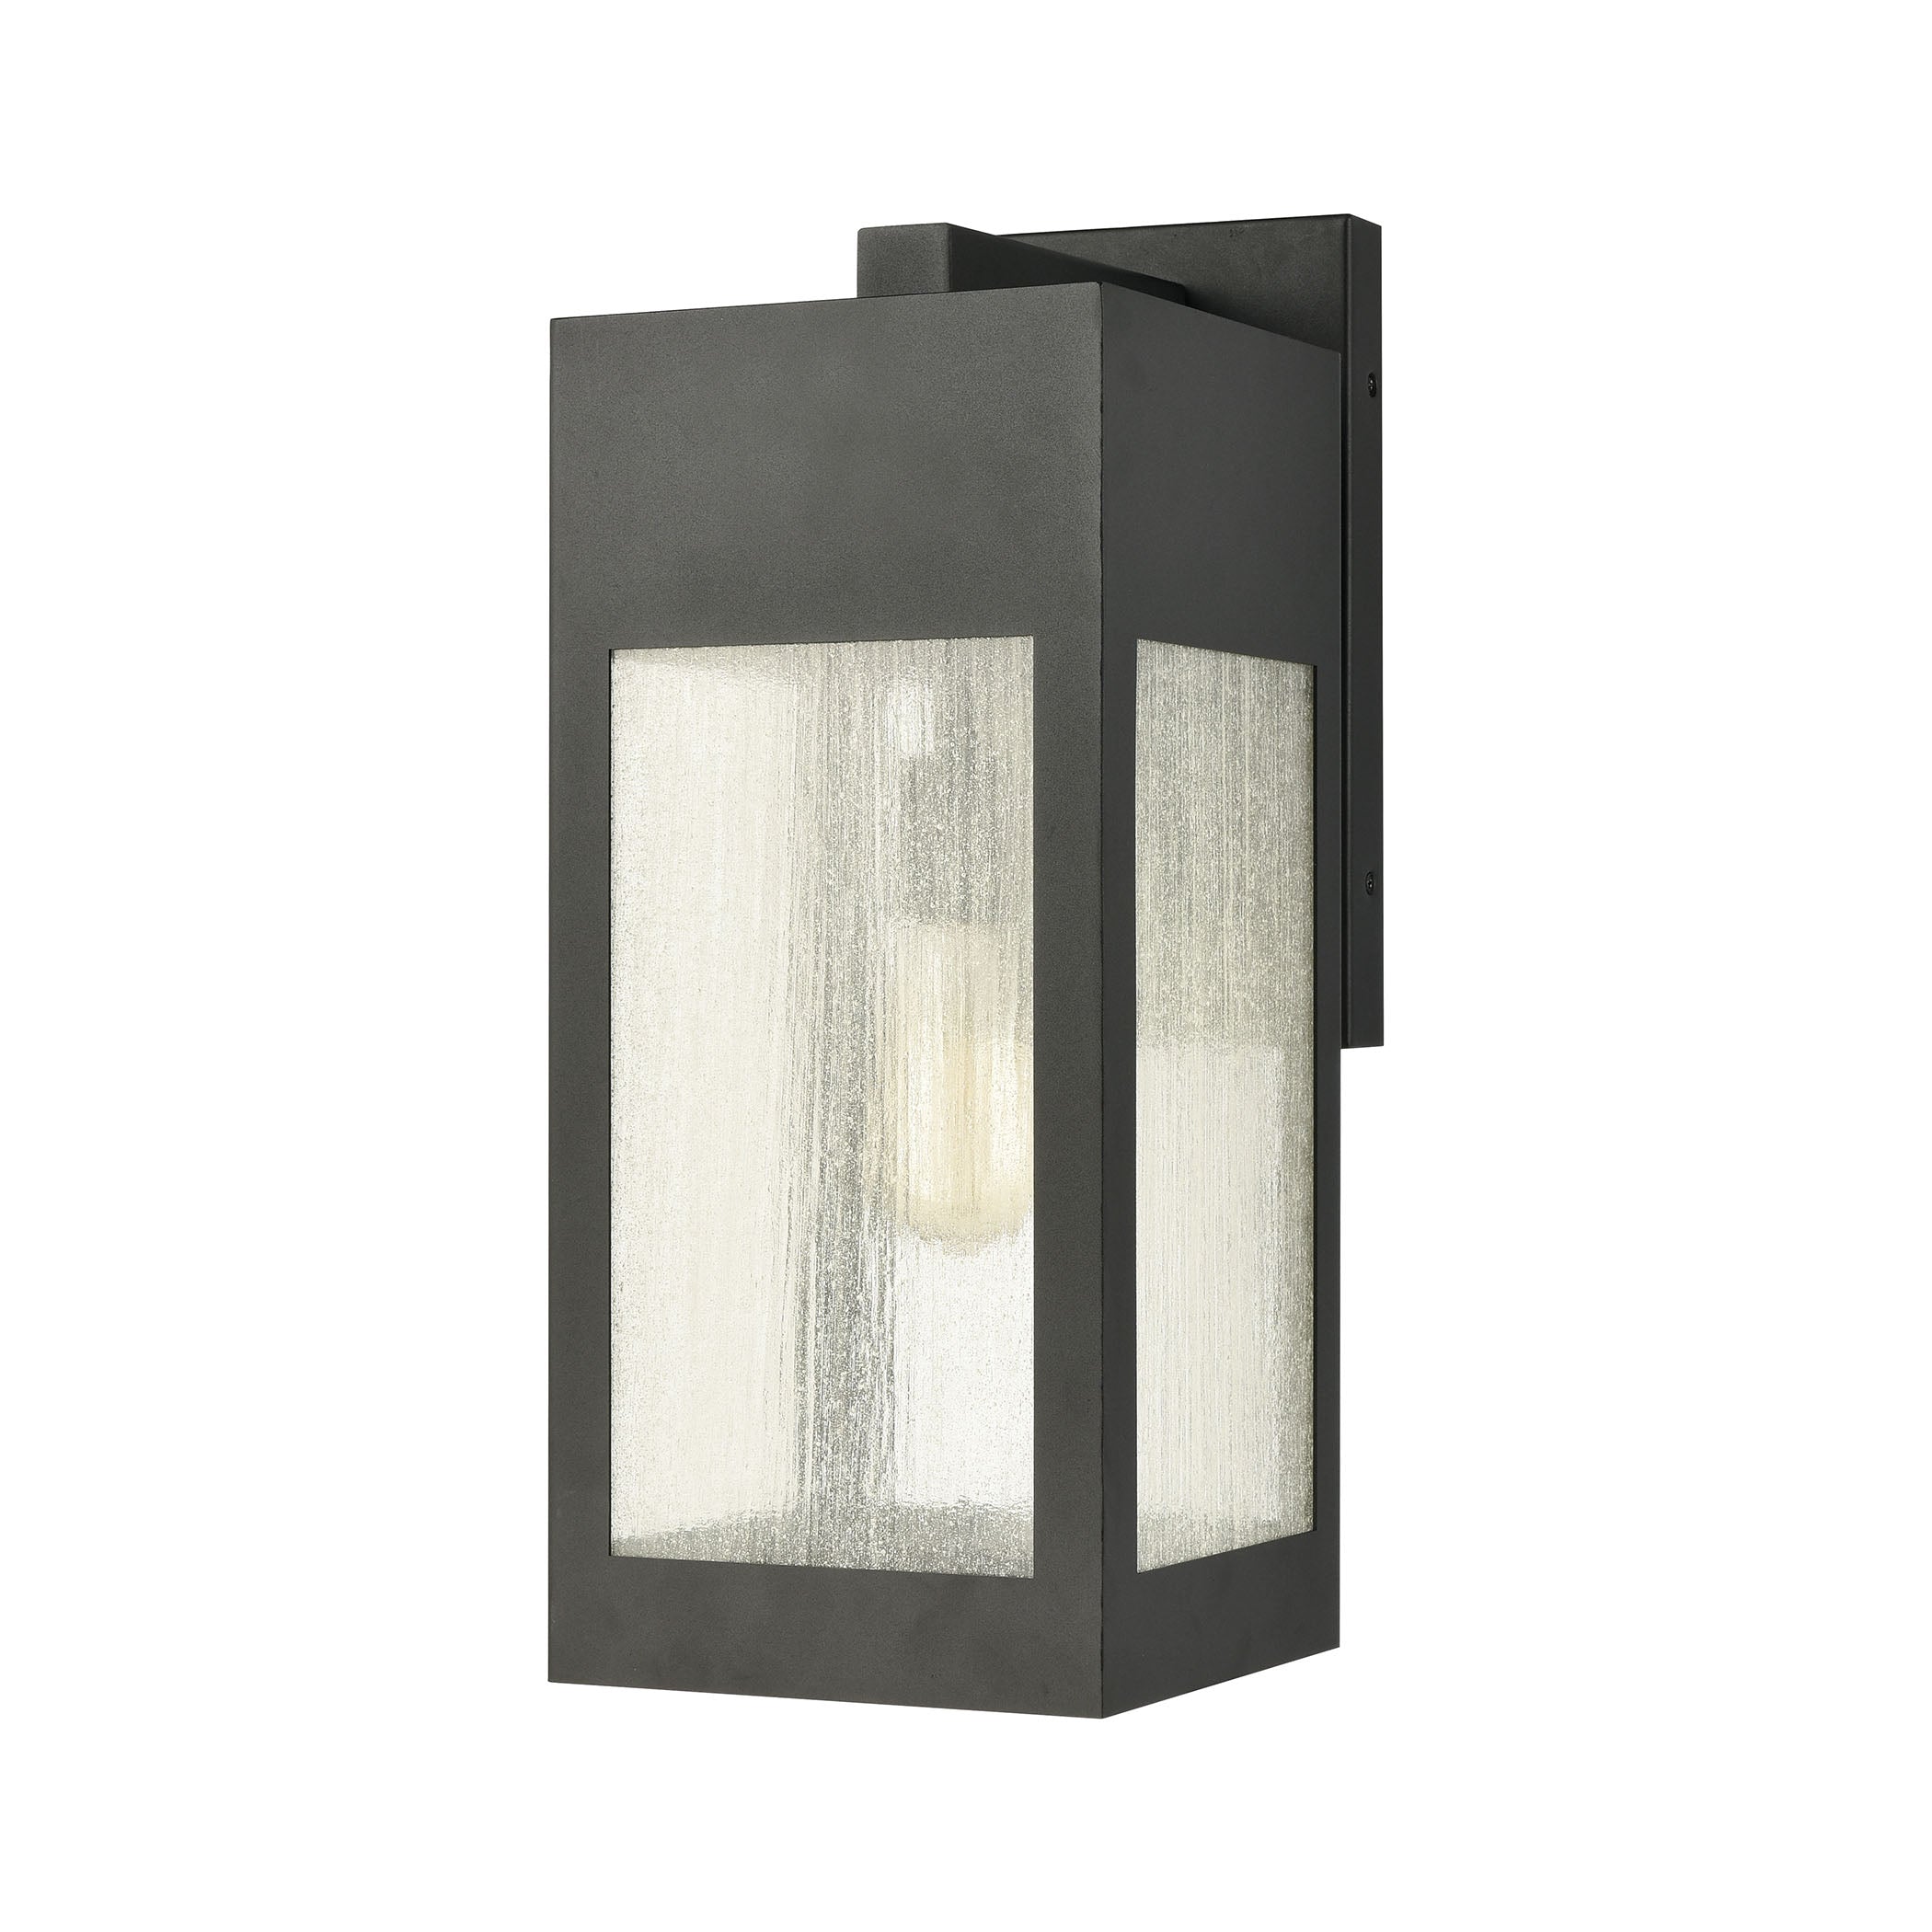 ELK Lighting 57302/1 Angus 1-Light Outdoor Sconce in Charcoal with Seedy Glass Enclosure